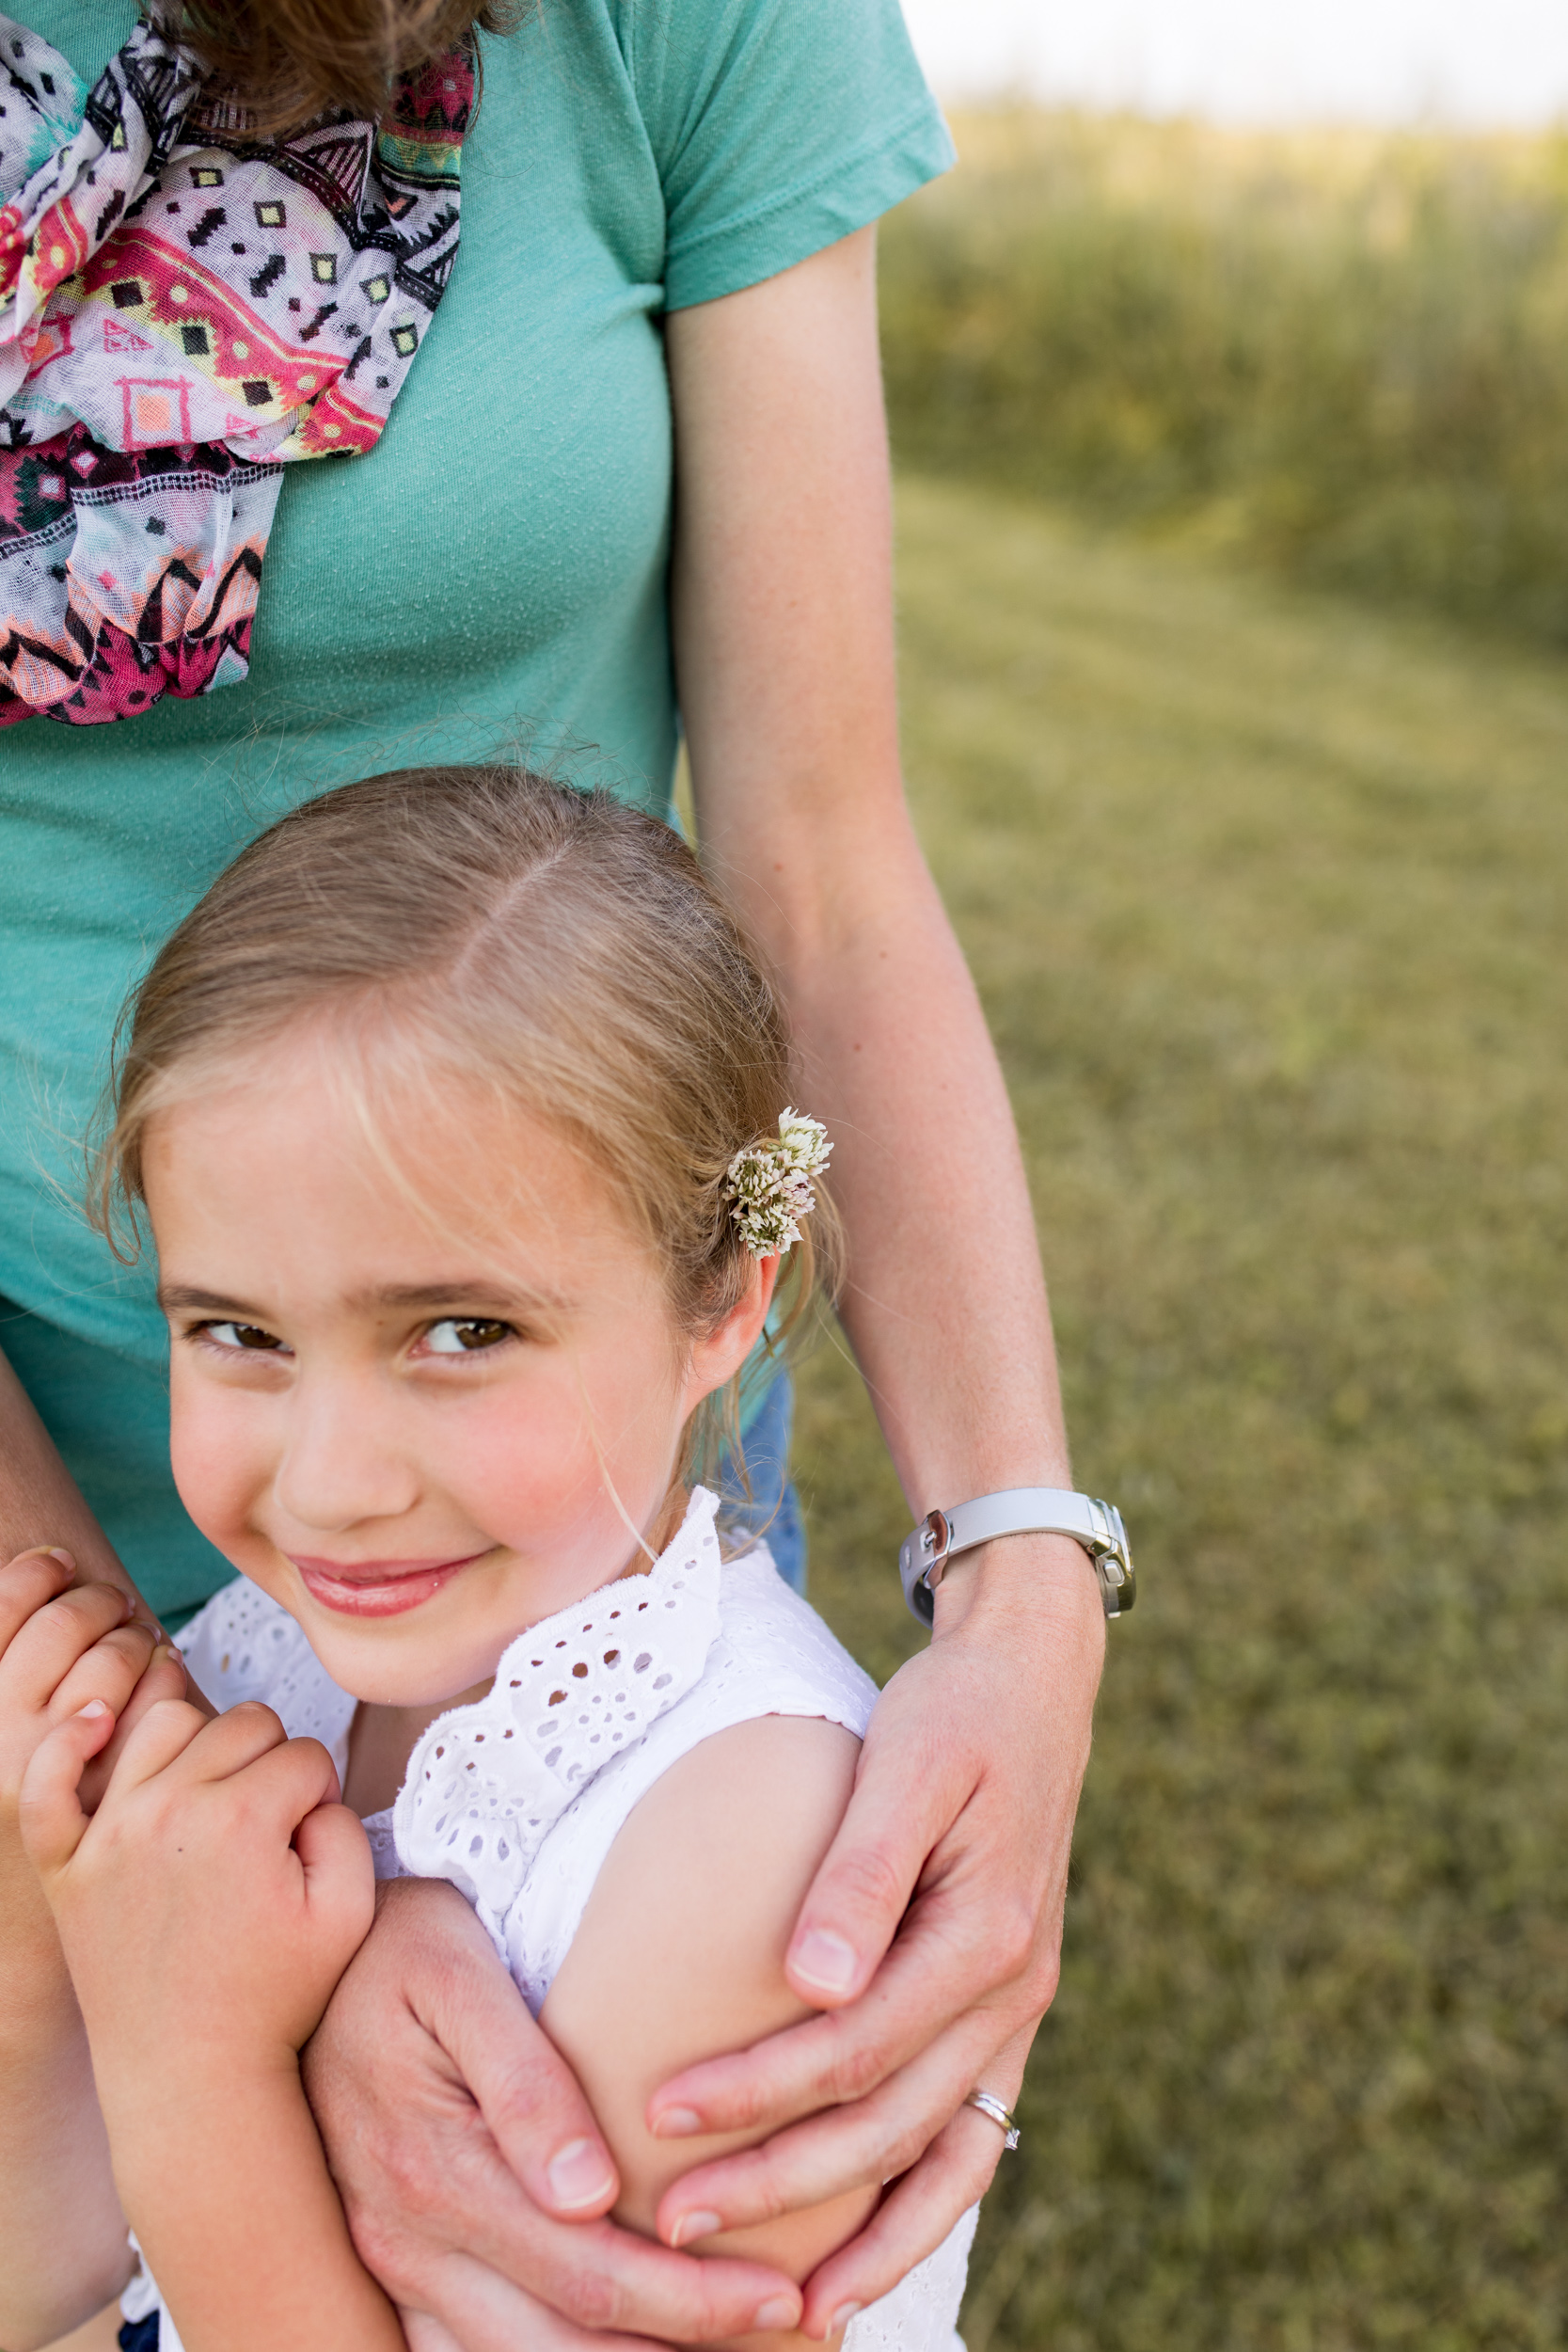 mom places flowers in daughter's hair